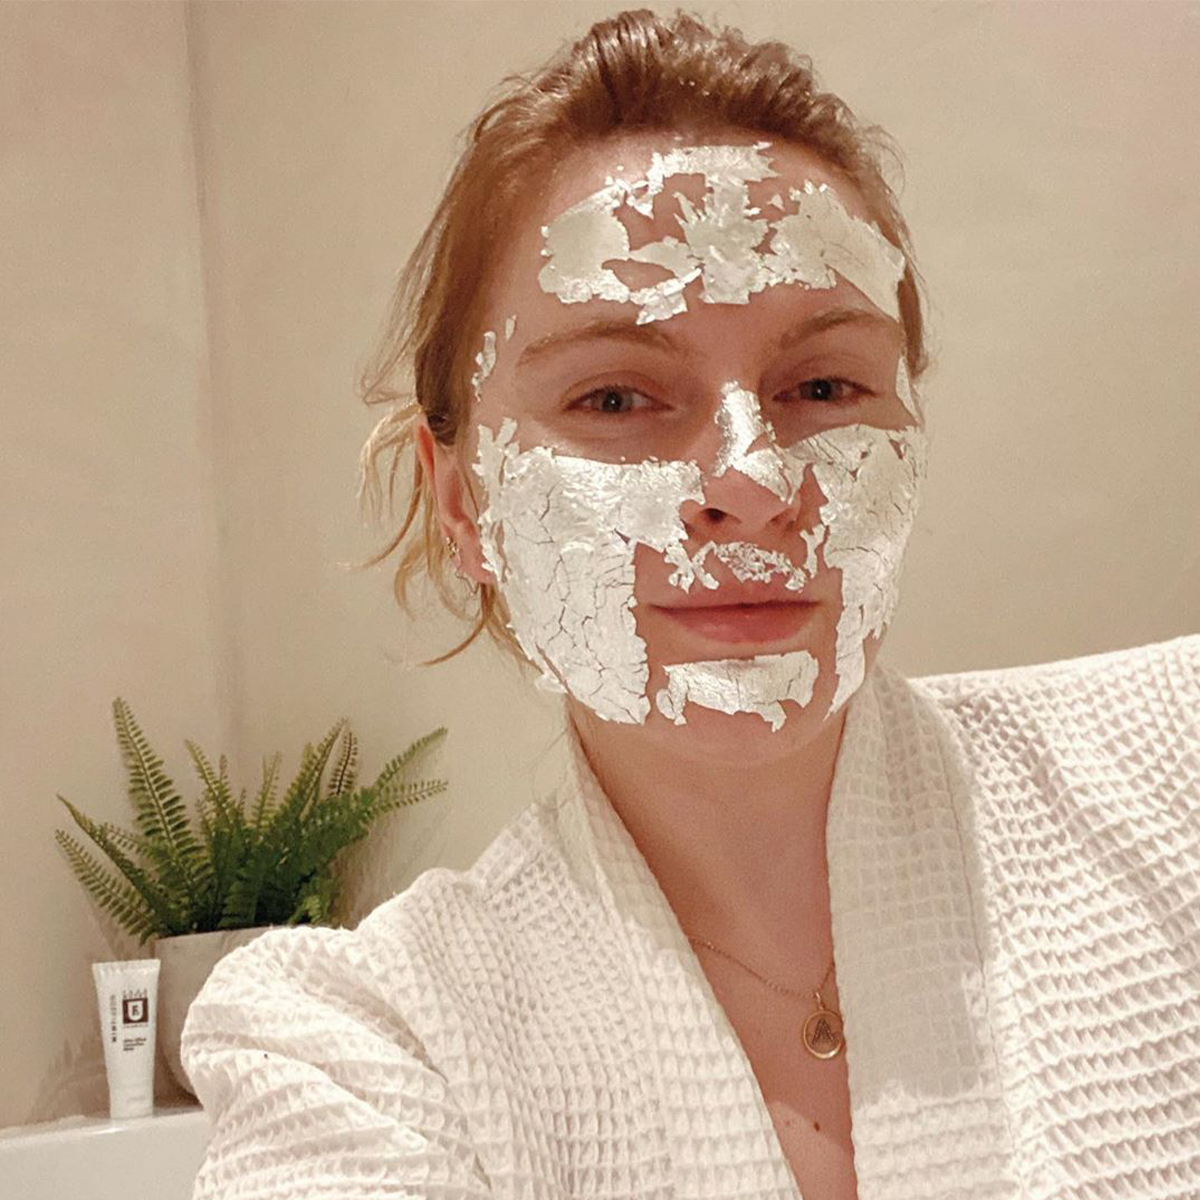 How To Remove Blackheads Like A Celebrity Esthetician Who What Wear